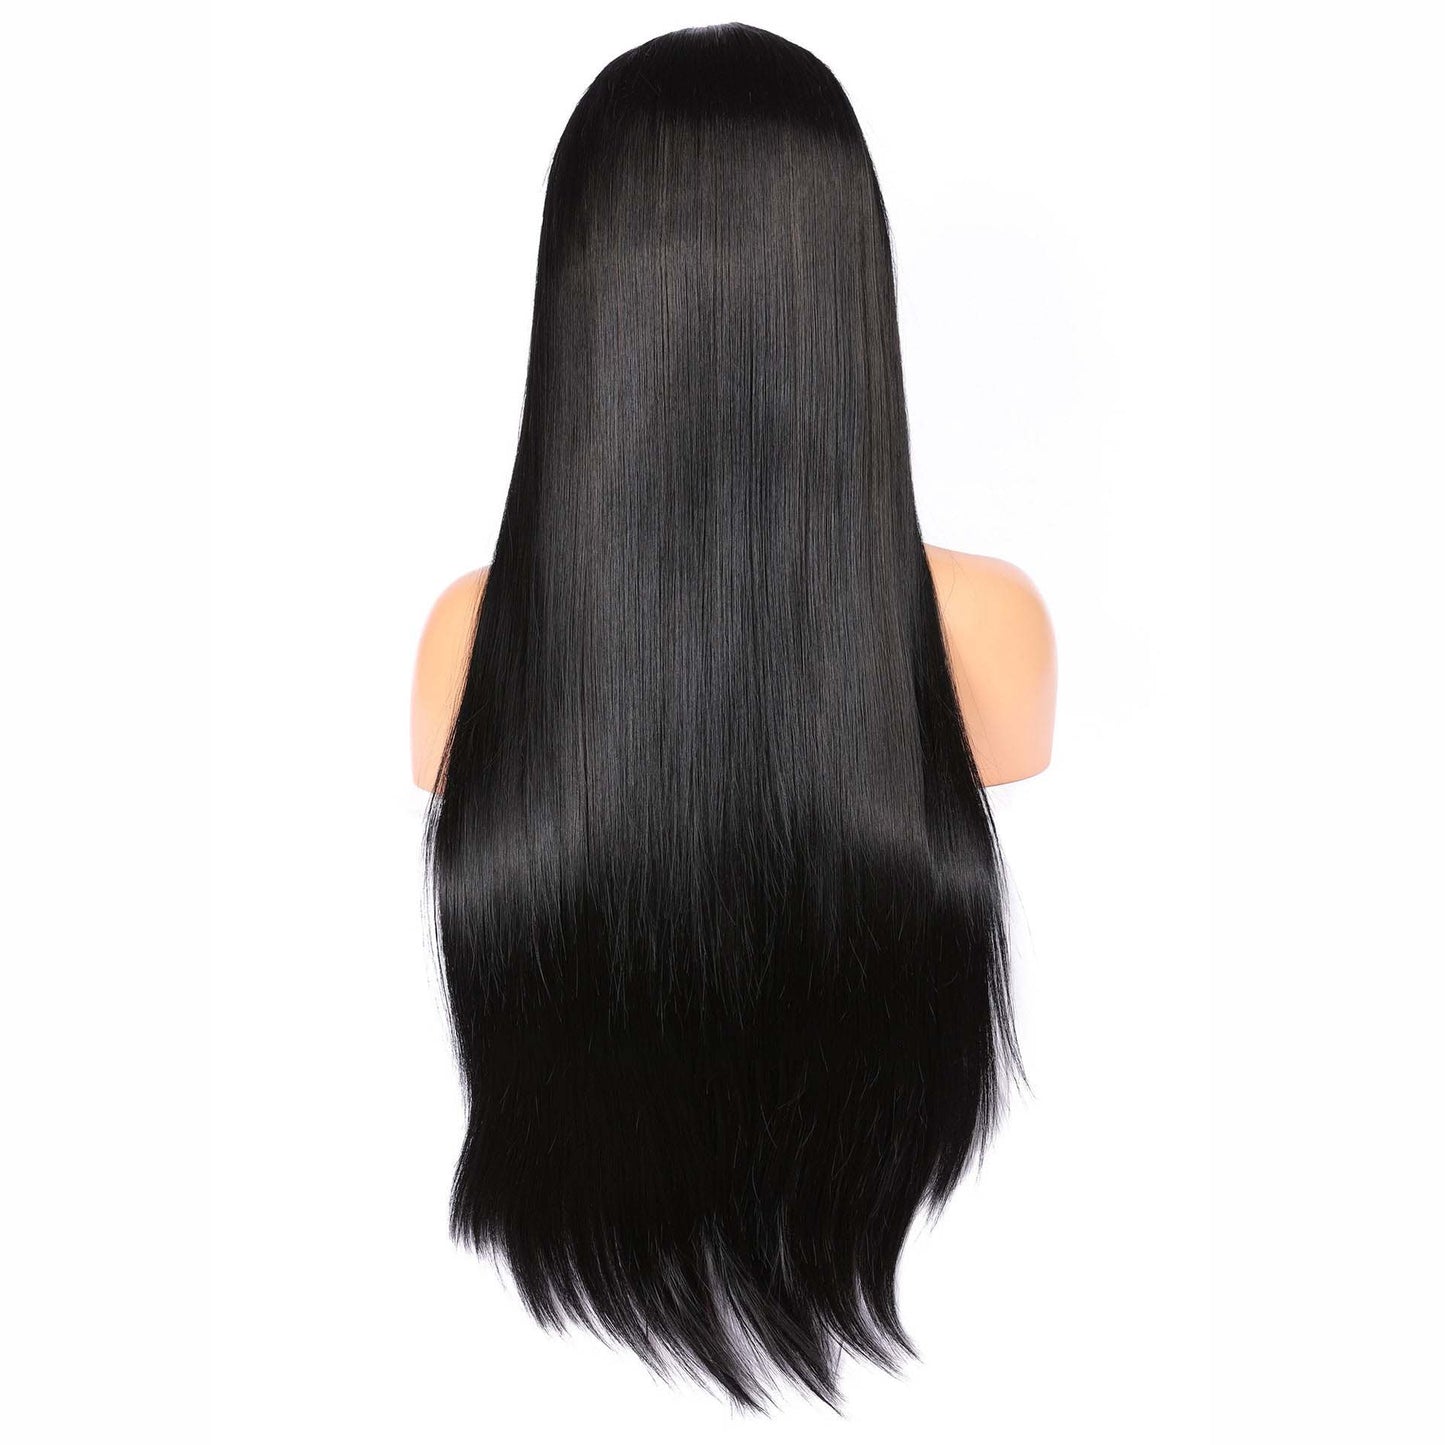 Women's Wig Long Straight Hair Front Lace Chemical Fiber Women's Wig